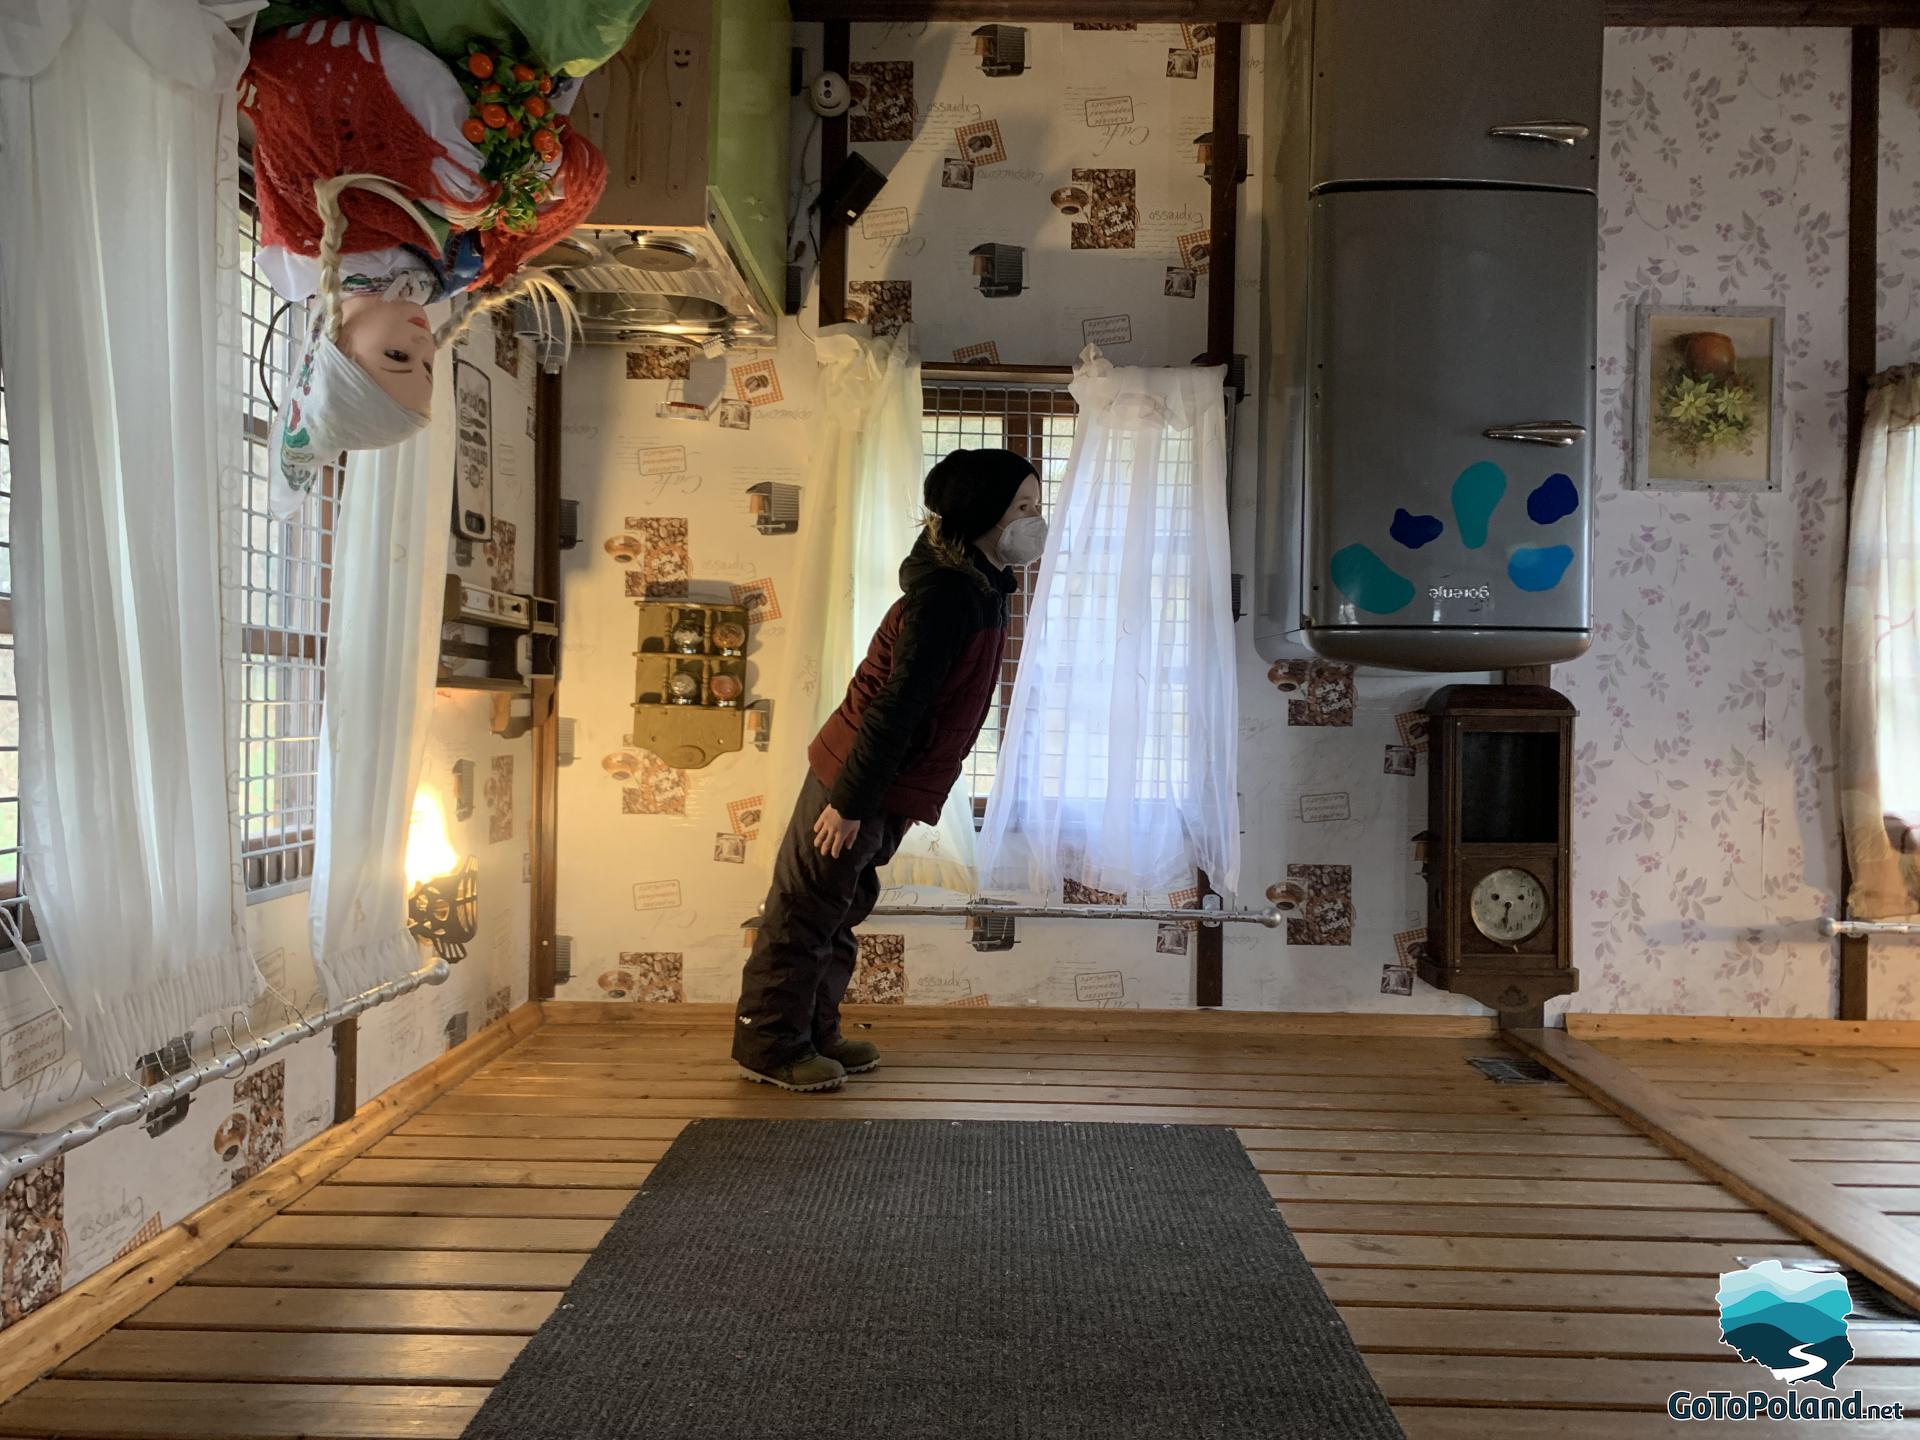 the boy is standing in a cottage that is upside down